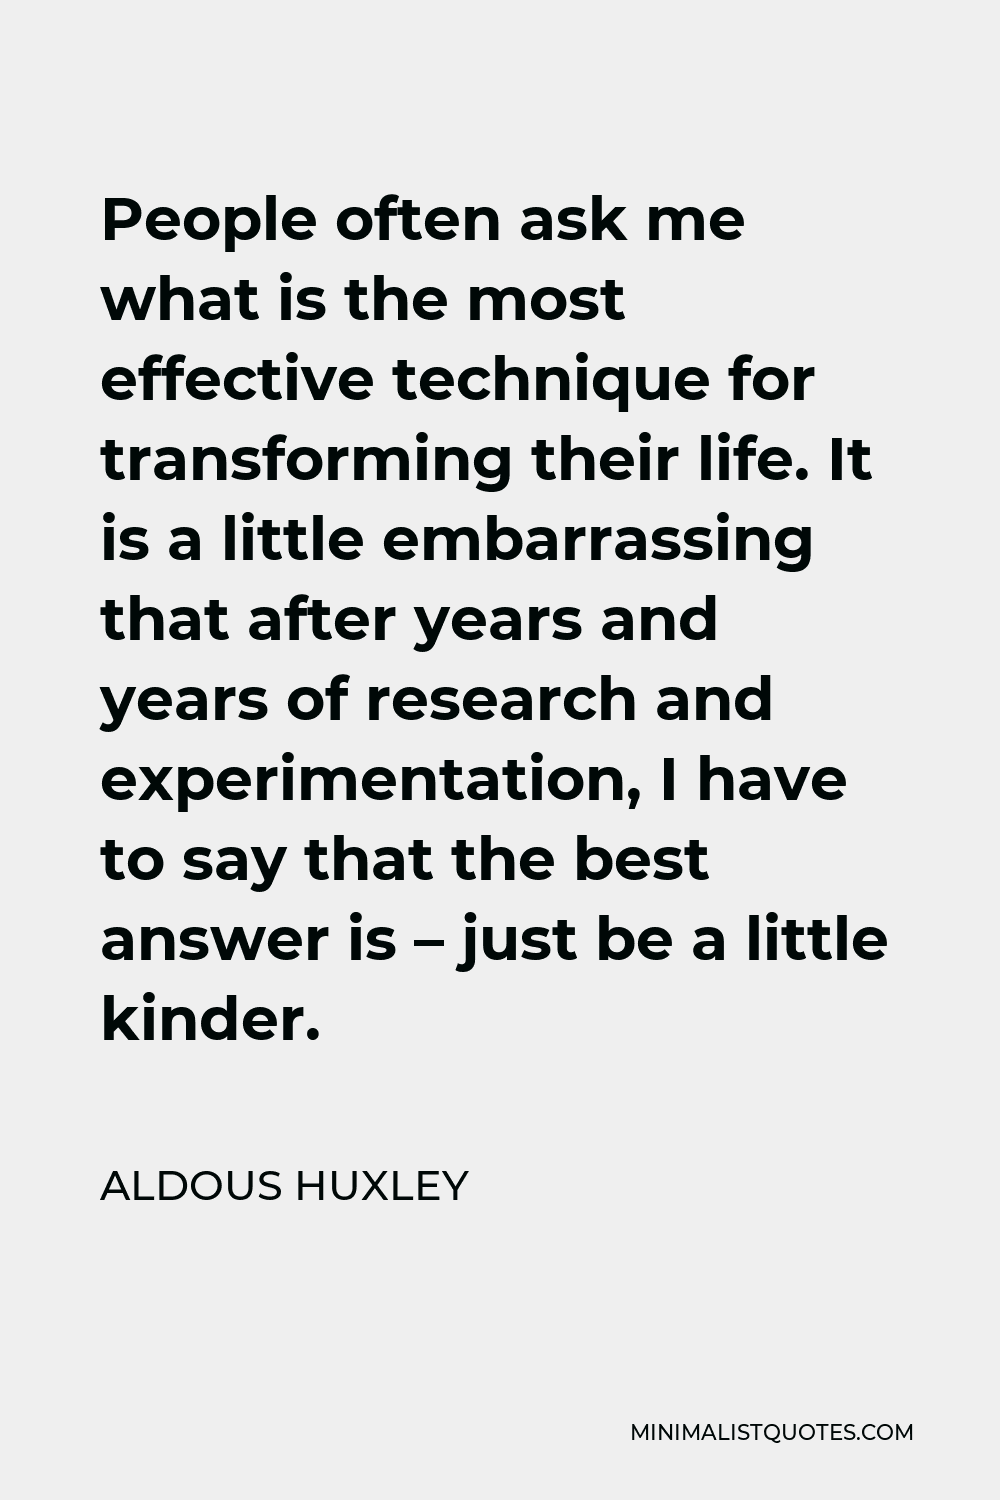 Aldous Huxley Quote - People often ask me what is the most effective technique for transforming their life. It is a little embarrassing that after years and years of research and experimentation, I have to say that the best answer is – just be a little kinder.